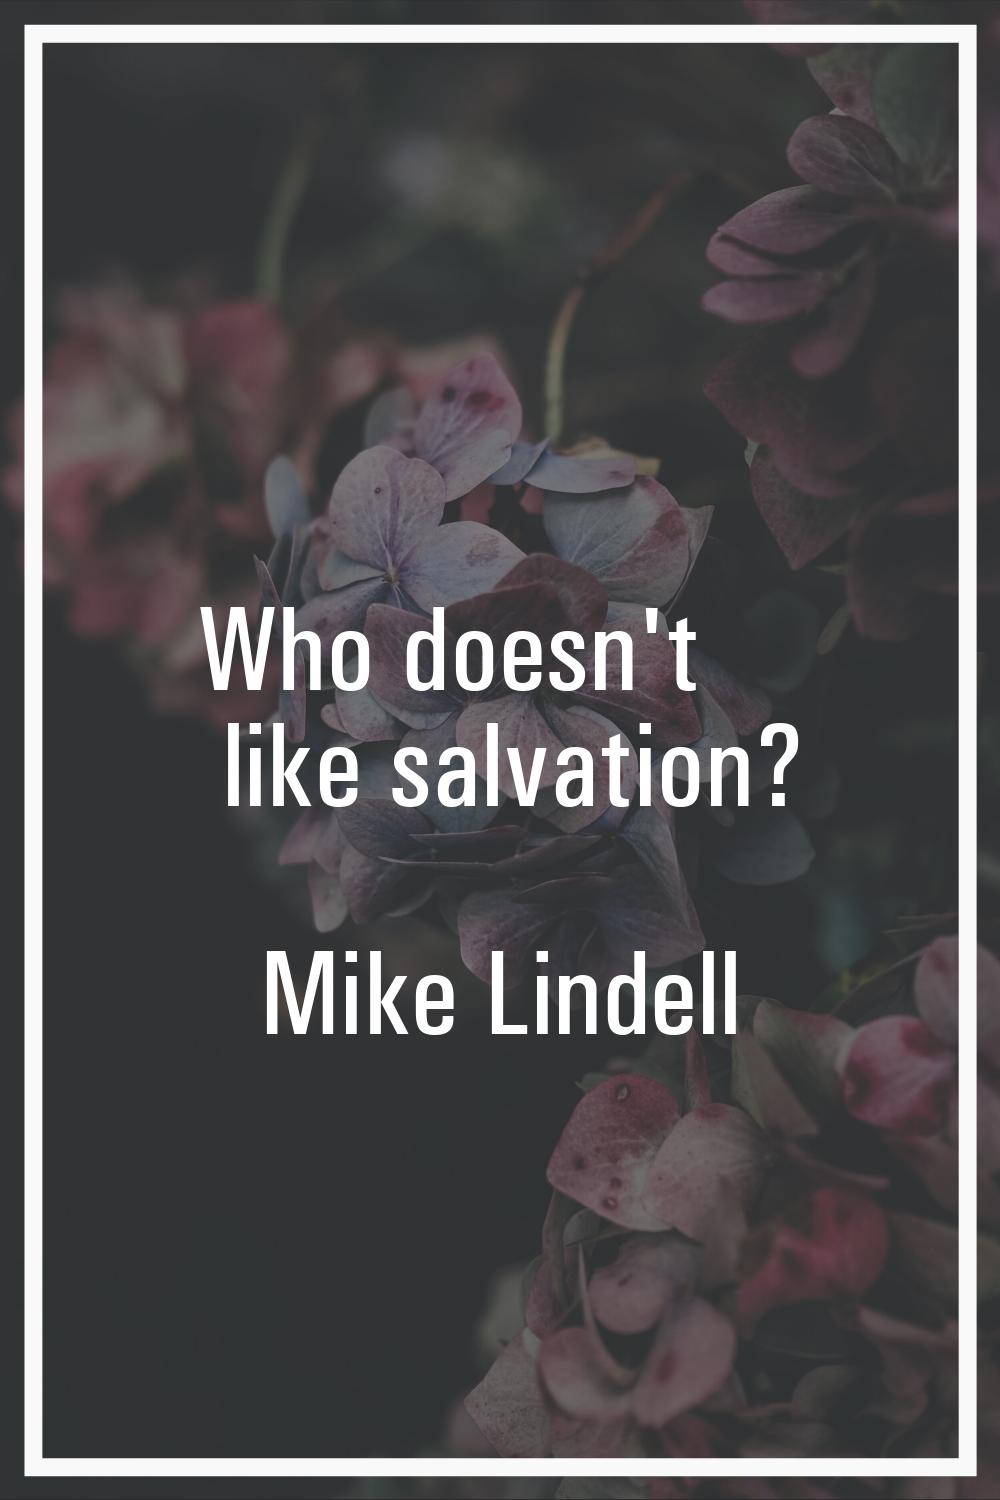 Who doesn't like salvation?